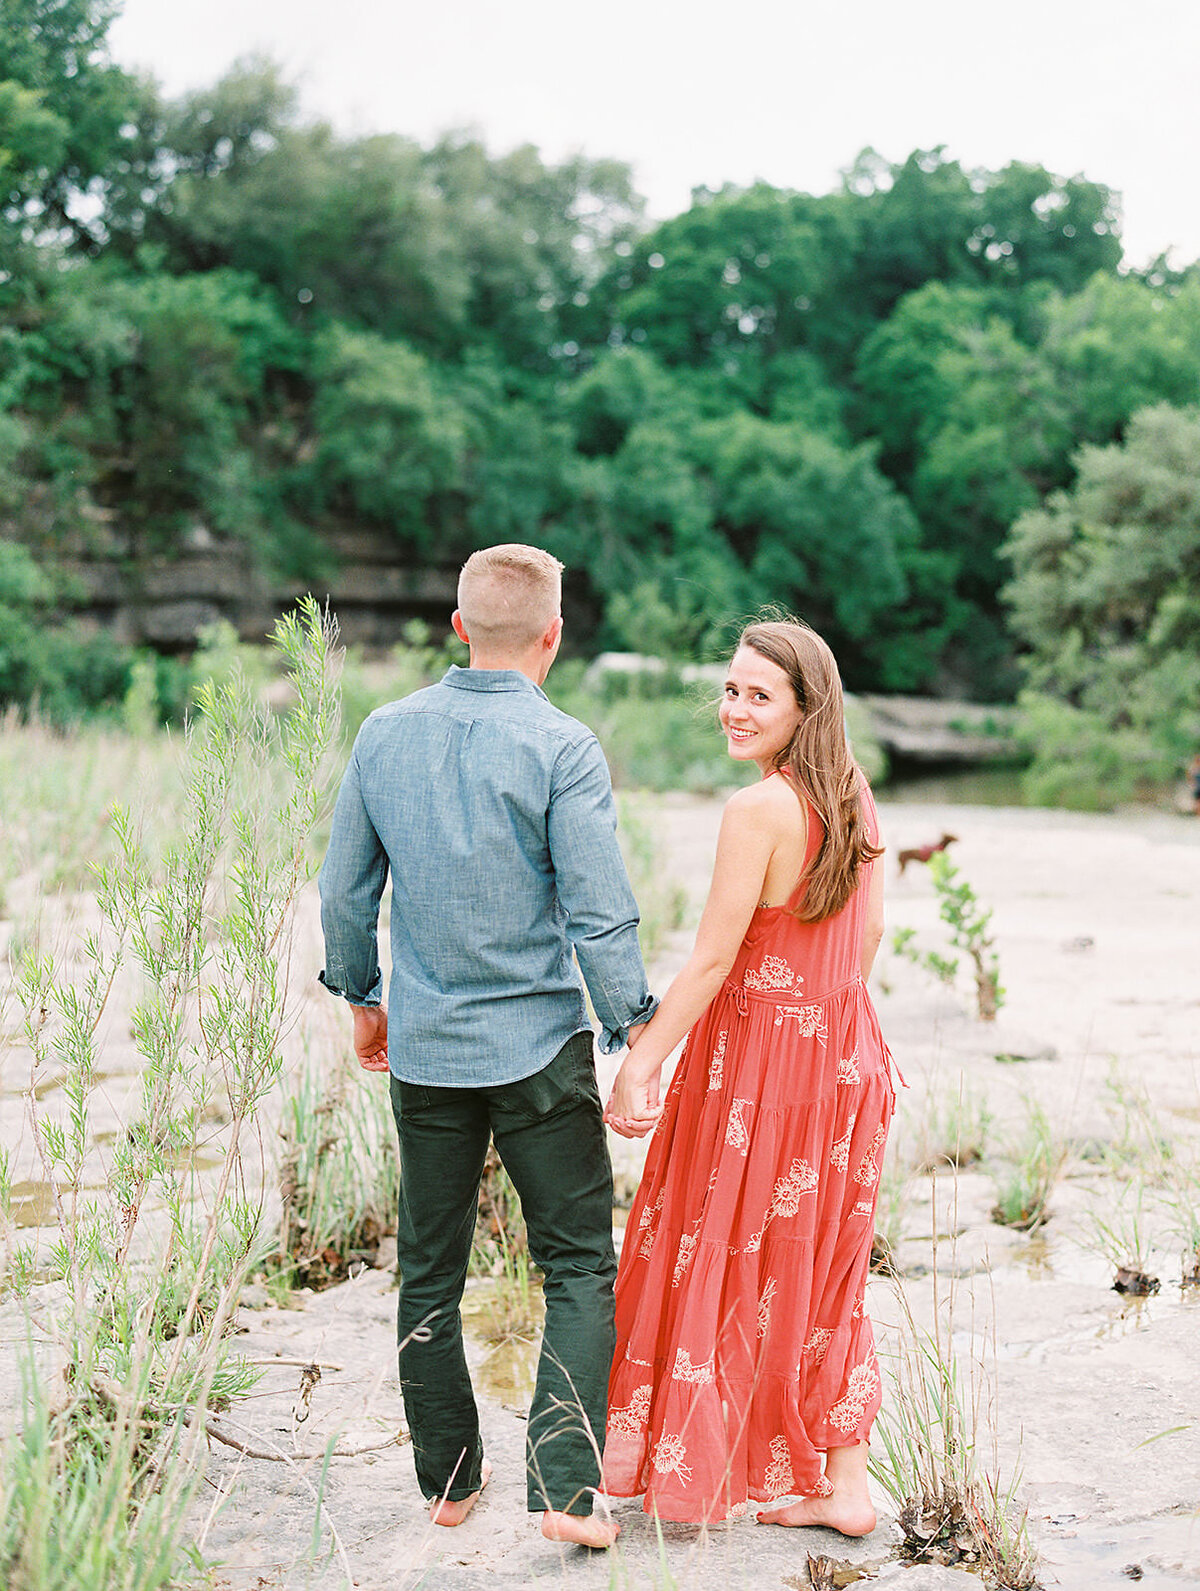 girl in red dress looks over her shoulder while holding her fiance's hand